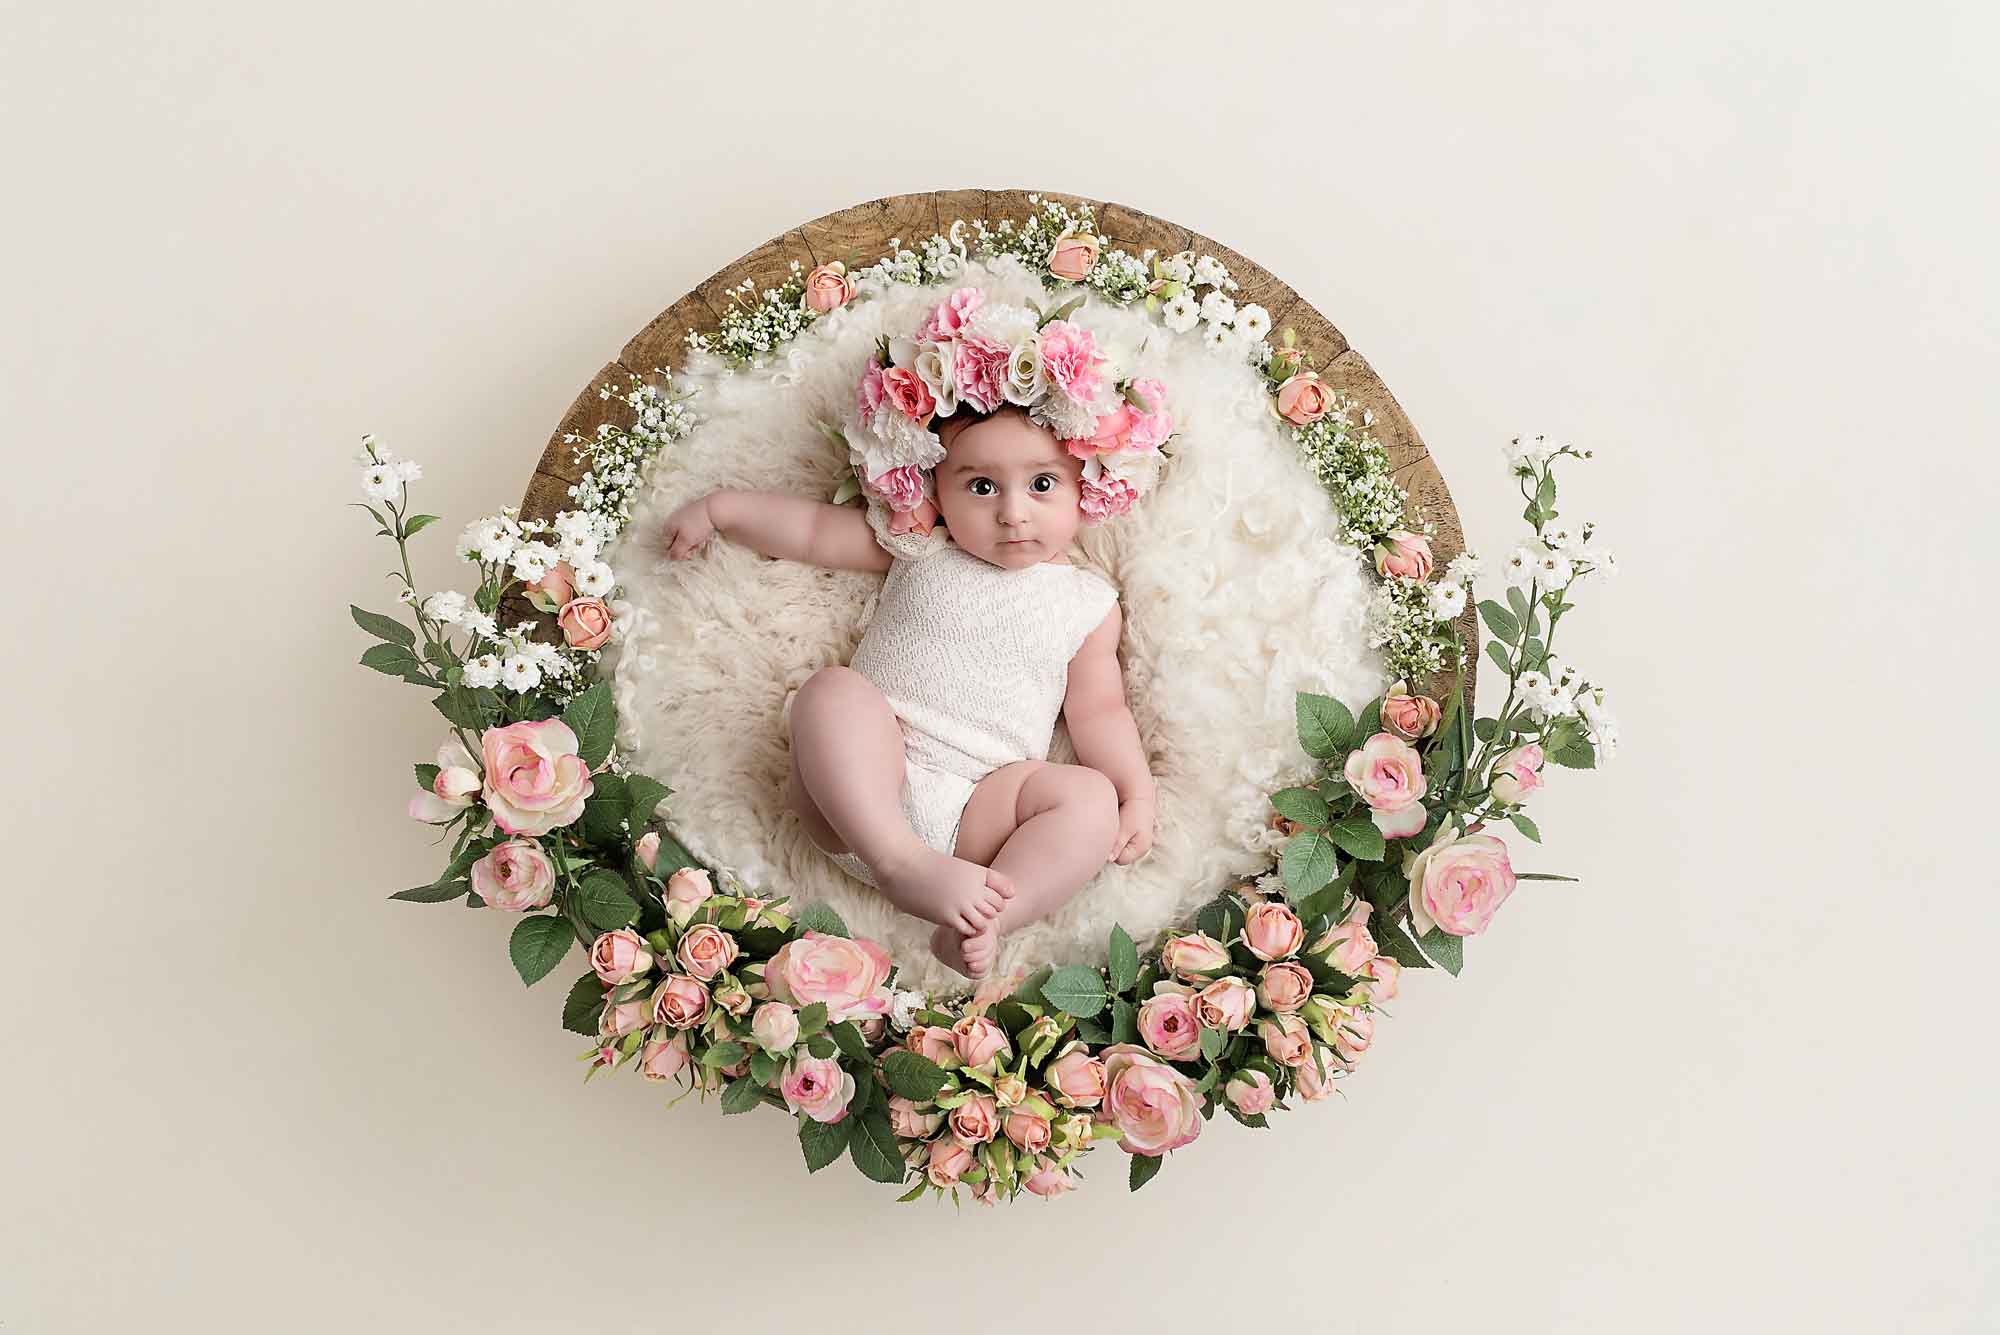 baby girl in a basket with flower bonnet by baby photography Manchester